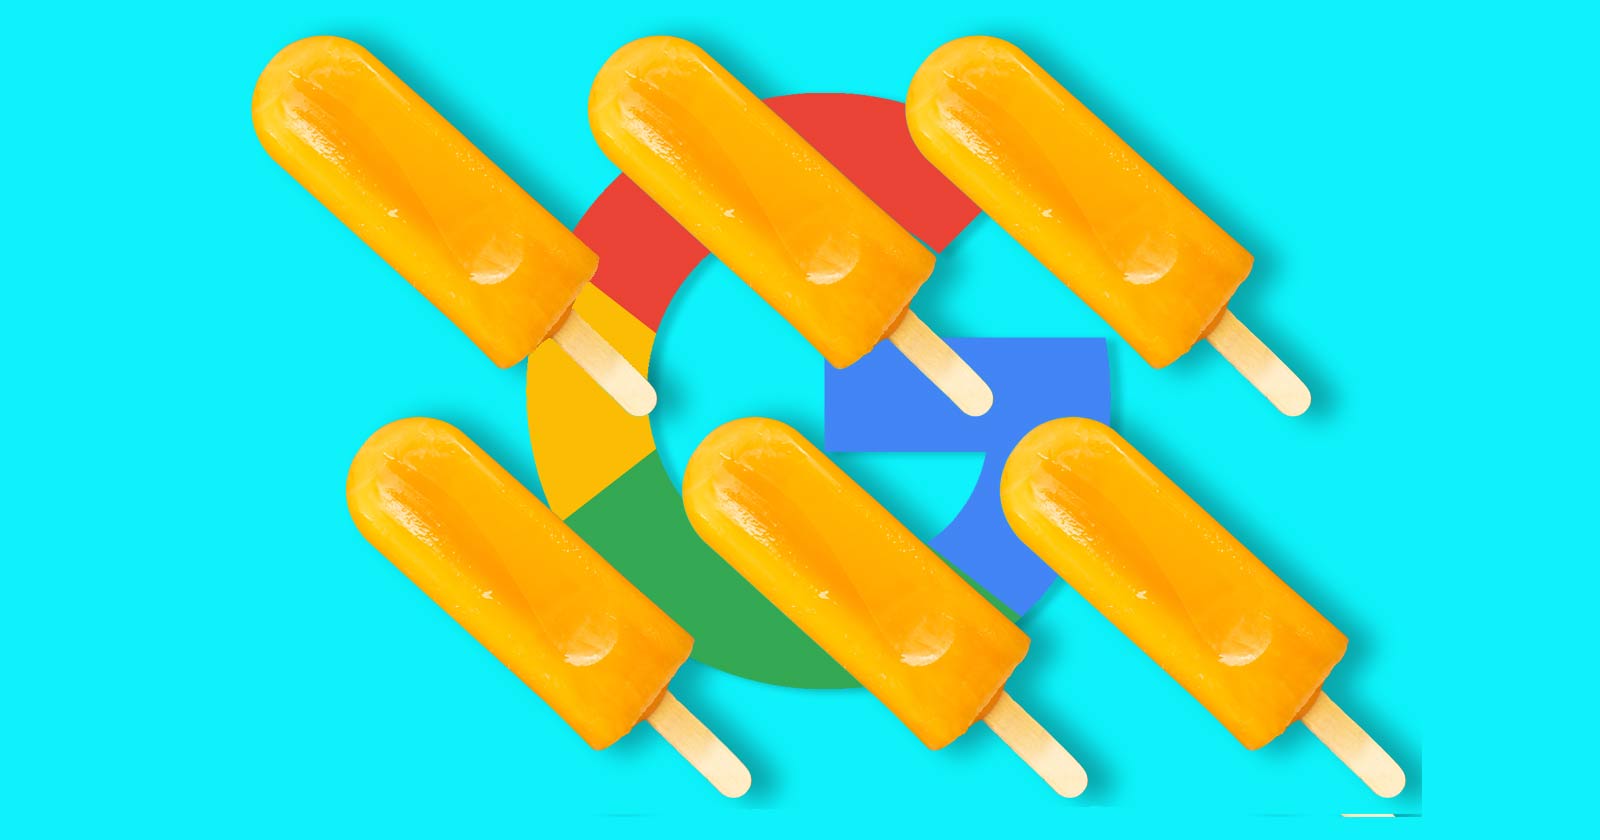 Google's logo with identical popsicles overlayed on top of it